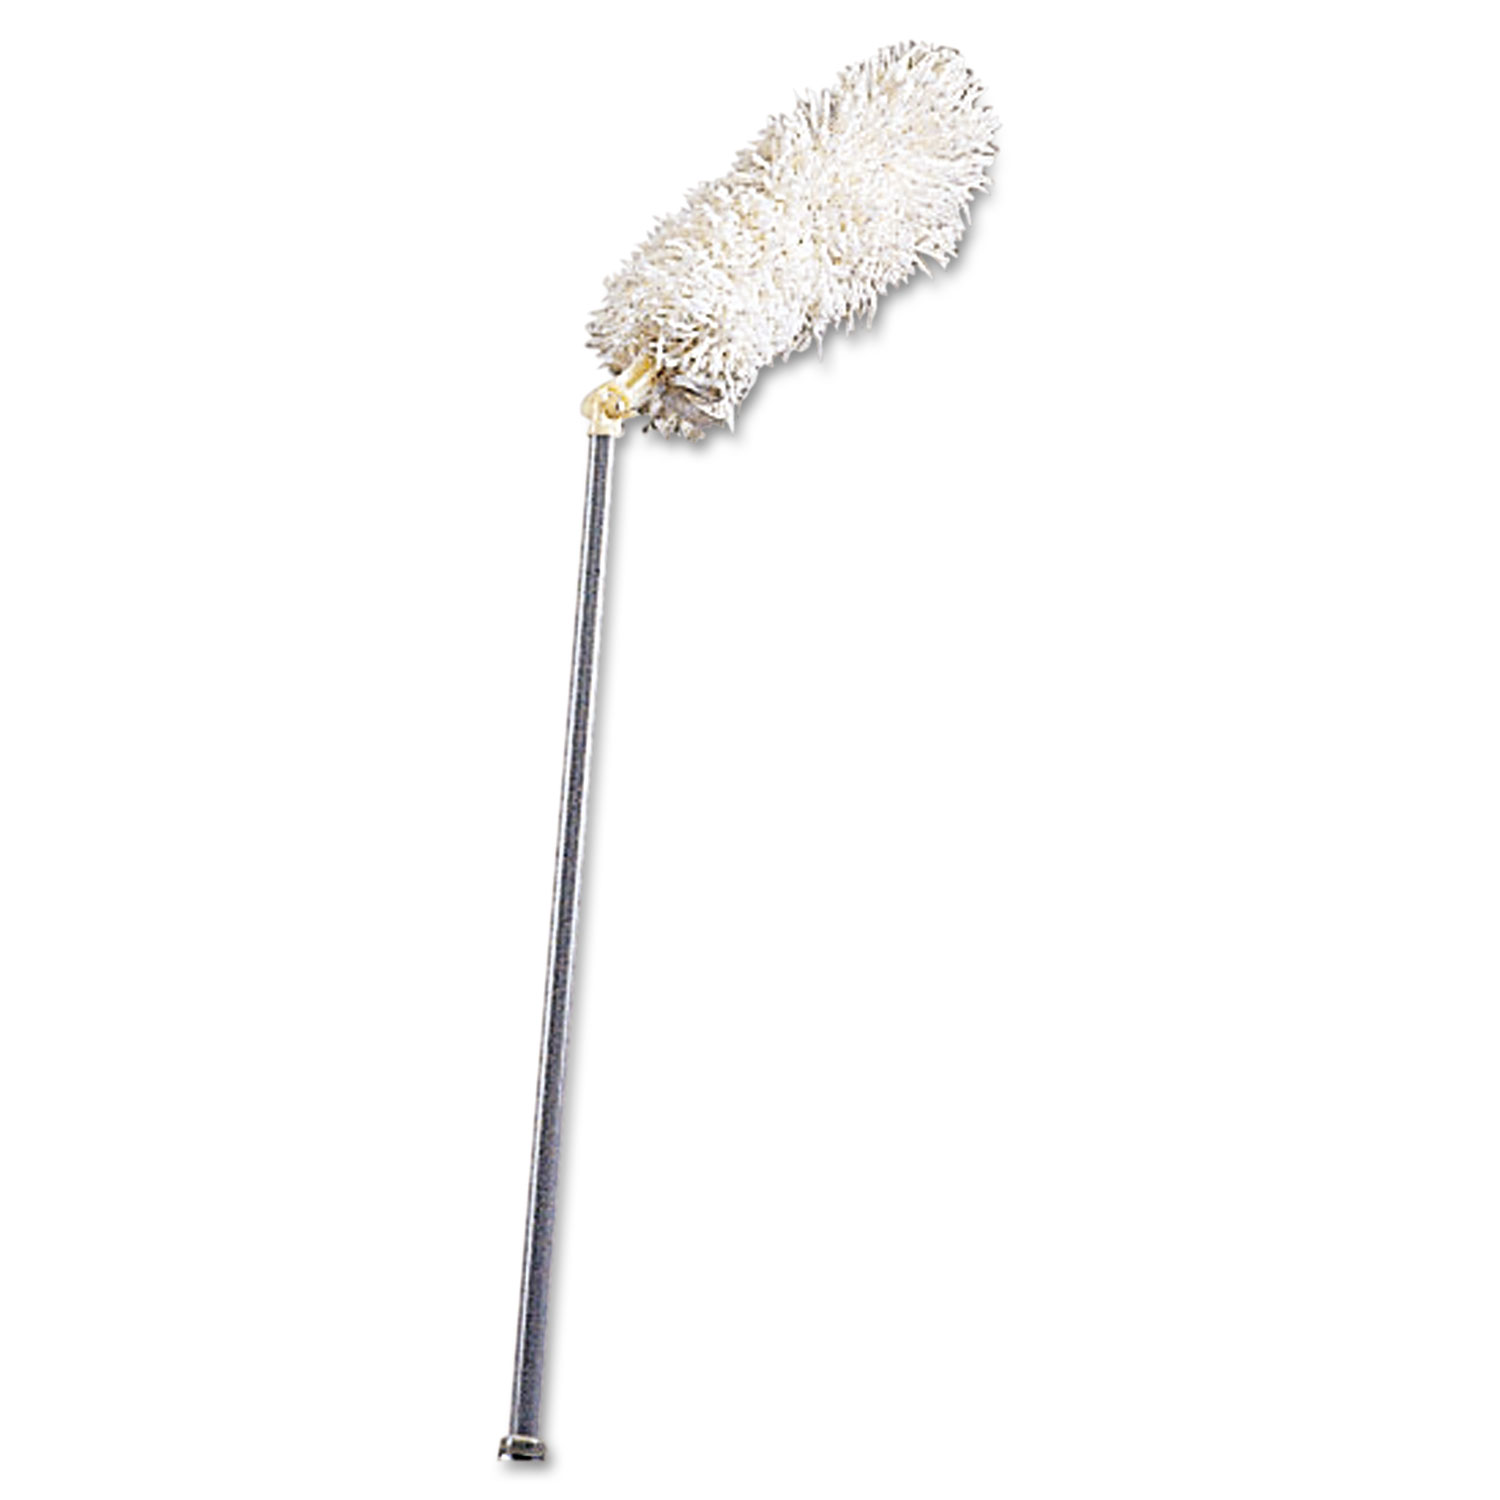 HiDuster Dusting Tool with Angled Lauderable Head, 51 Extension Handle